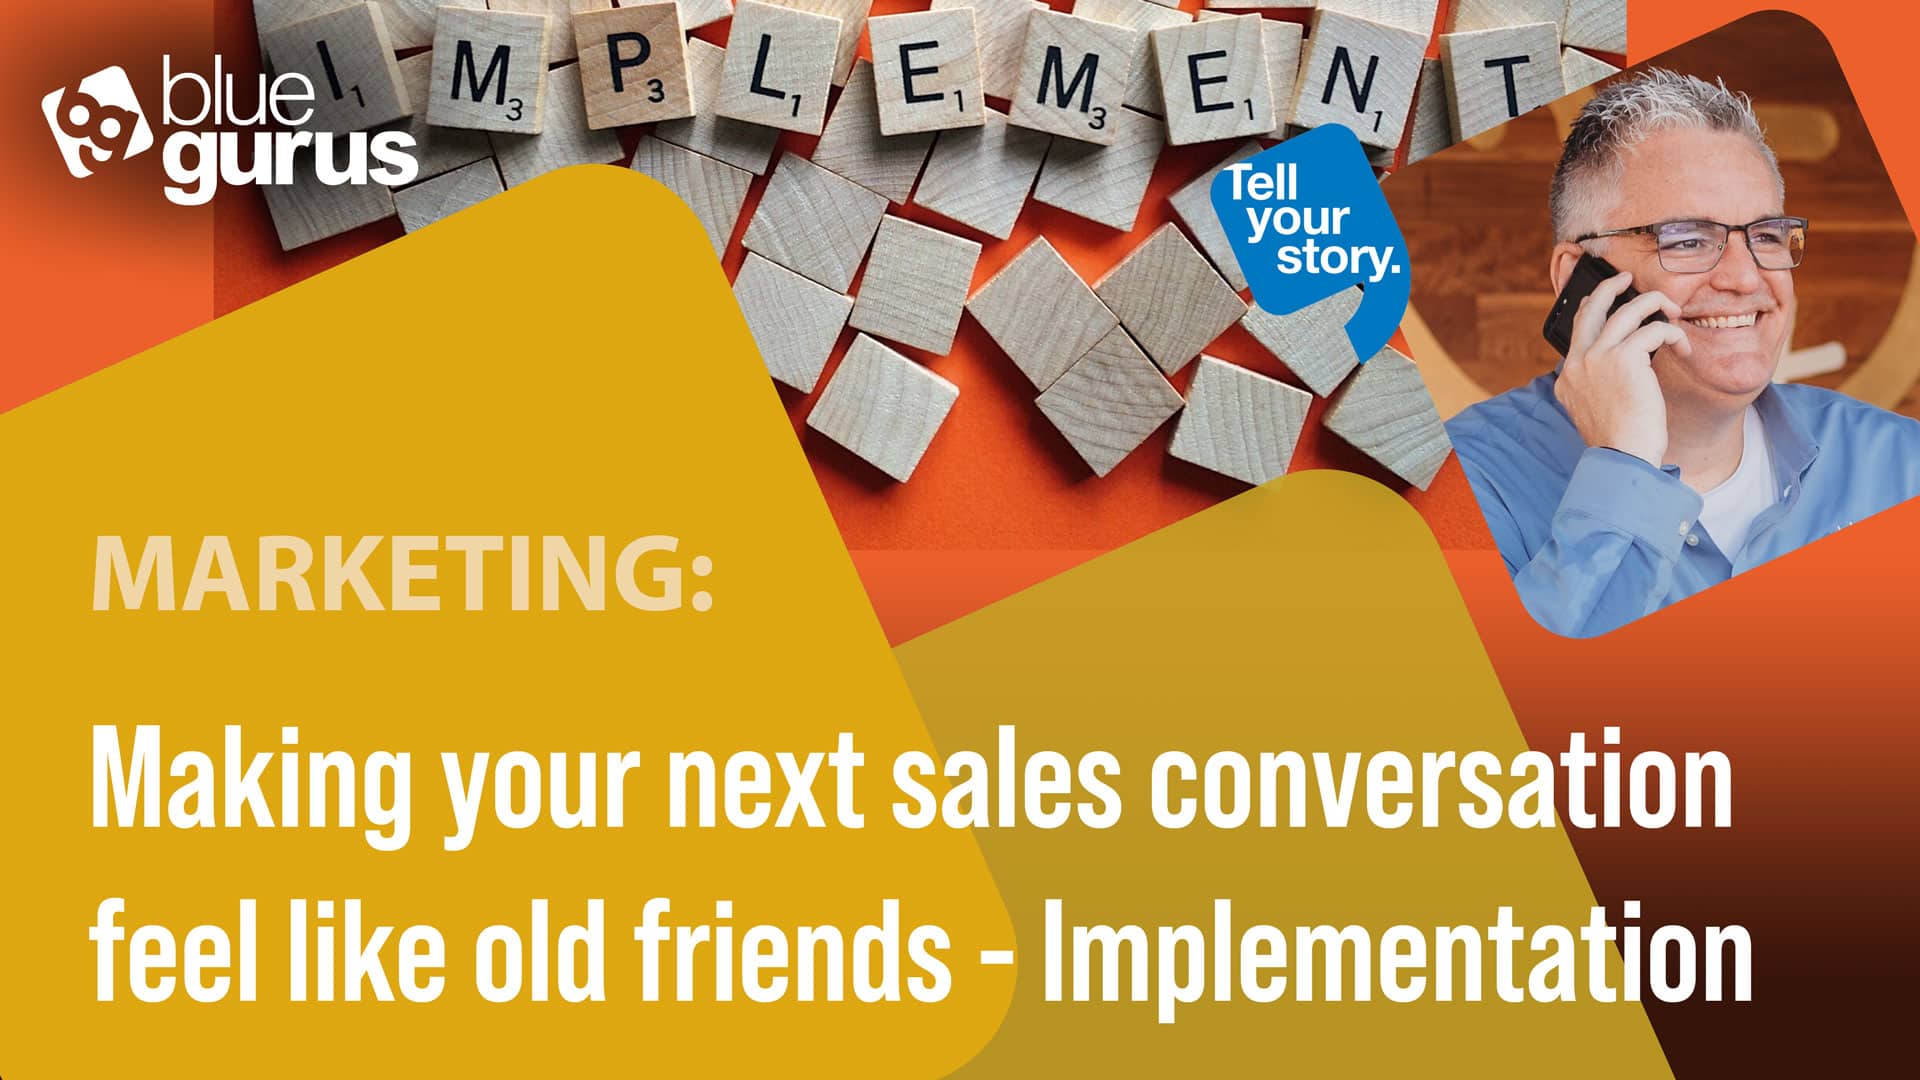 Making your next sales conversation feel like old friends - Implementation